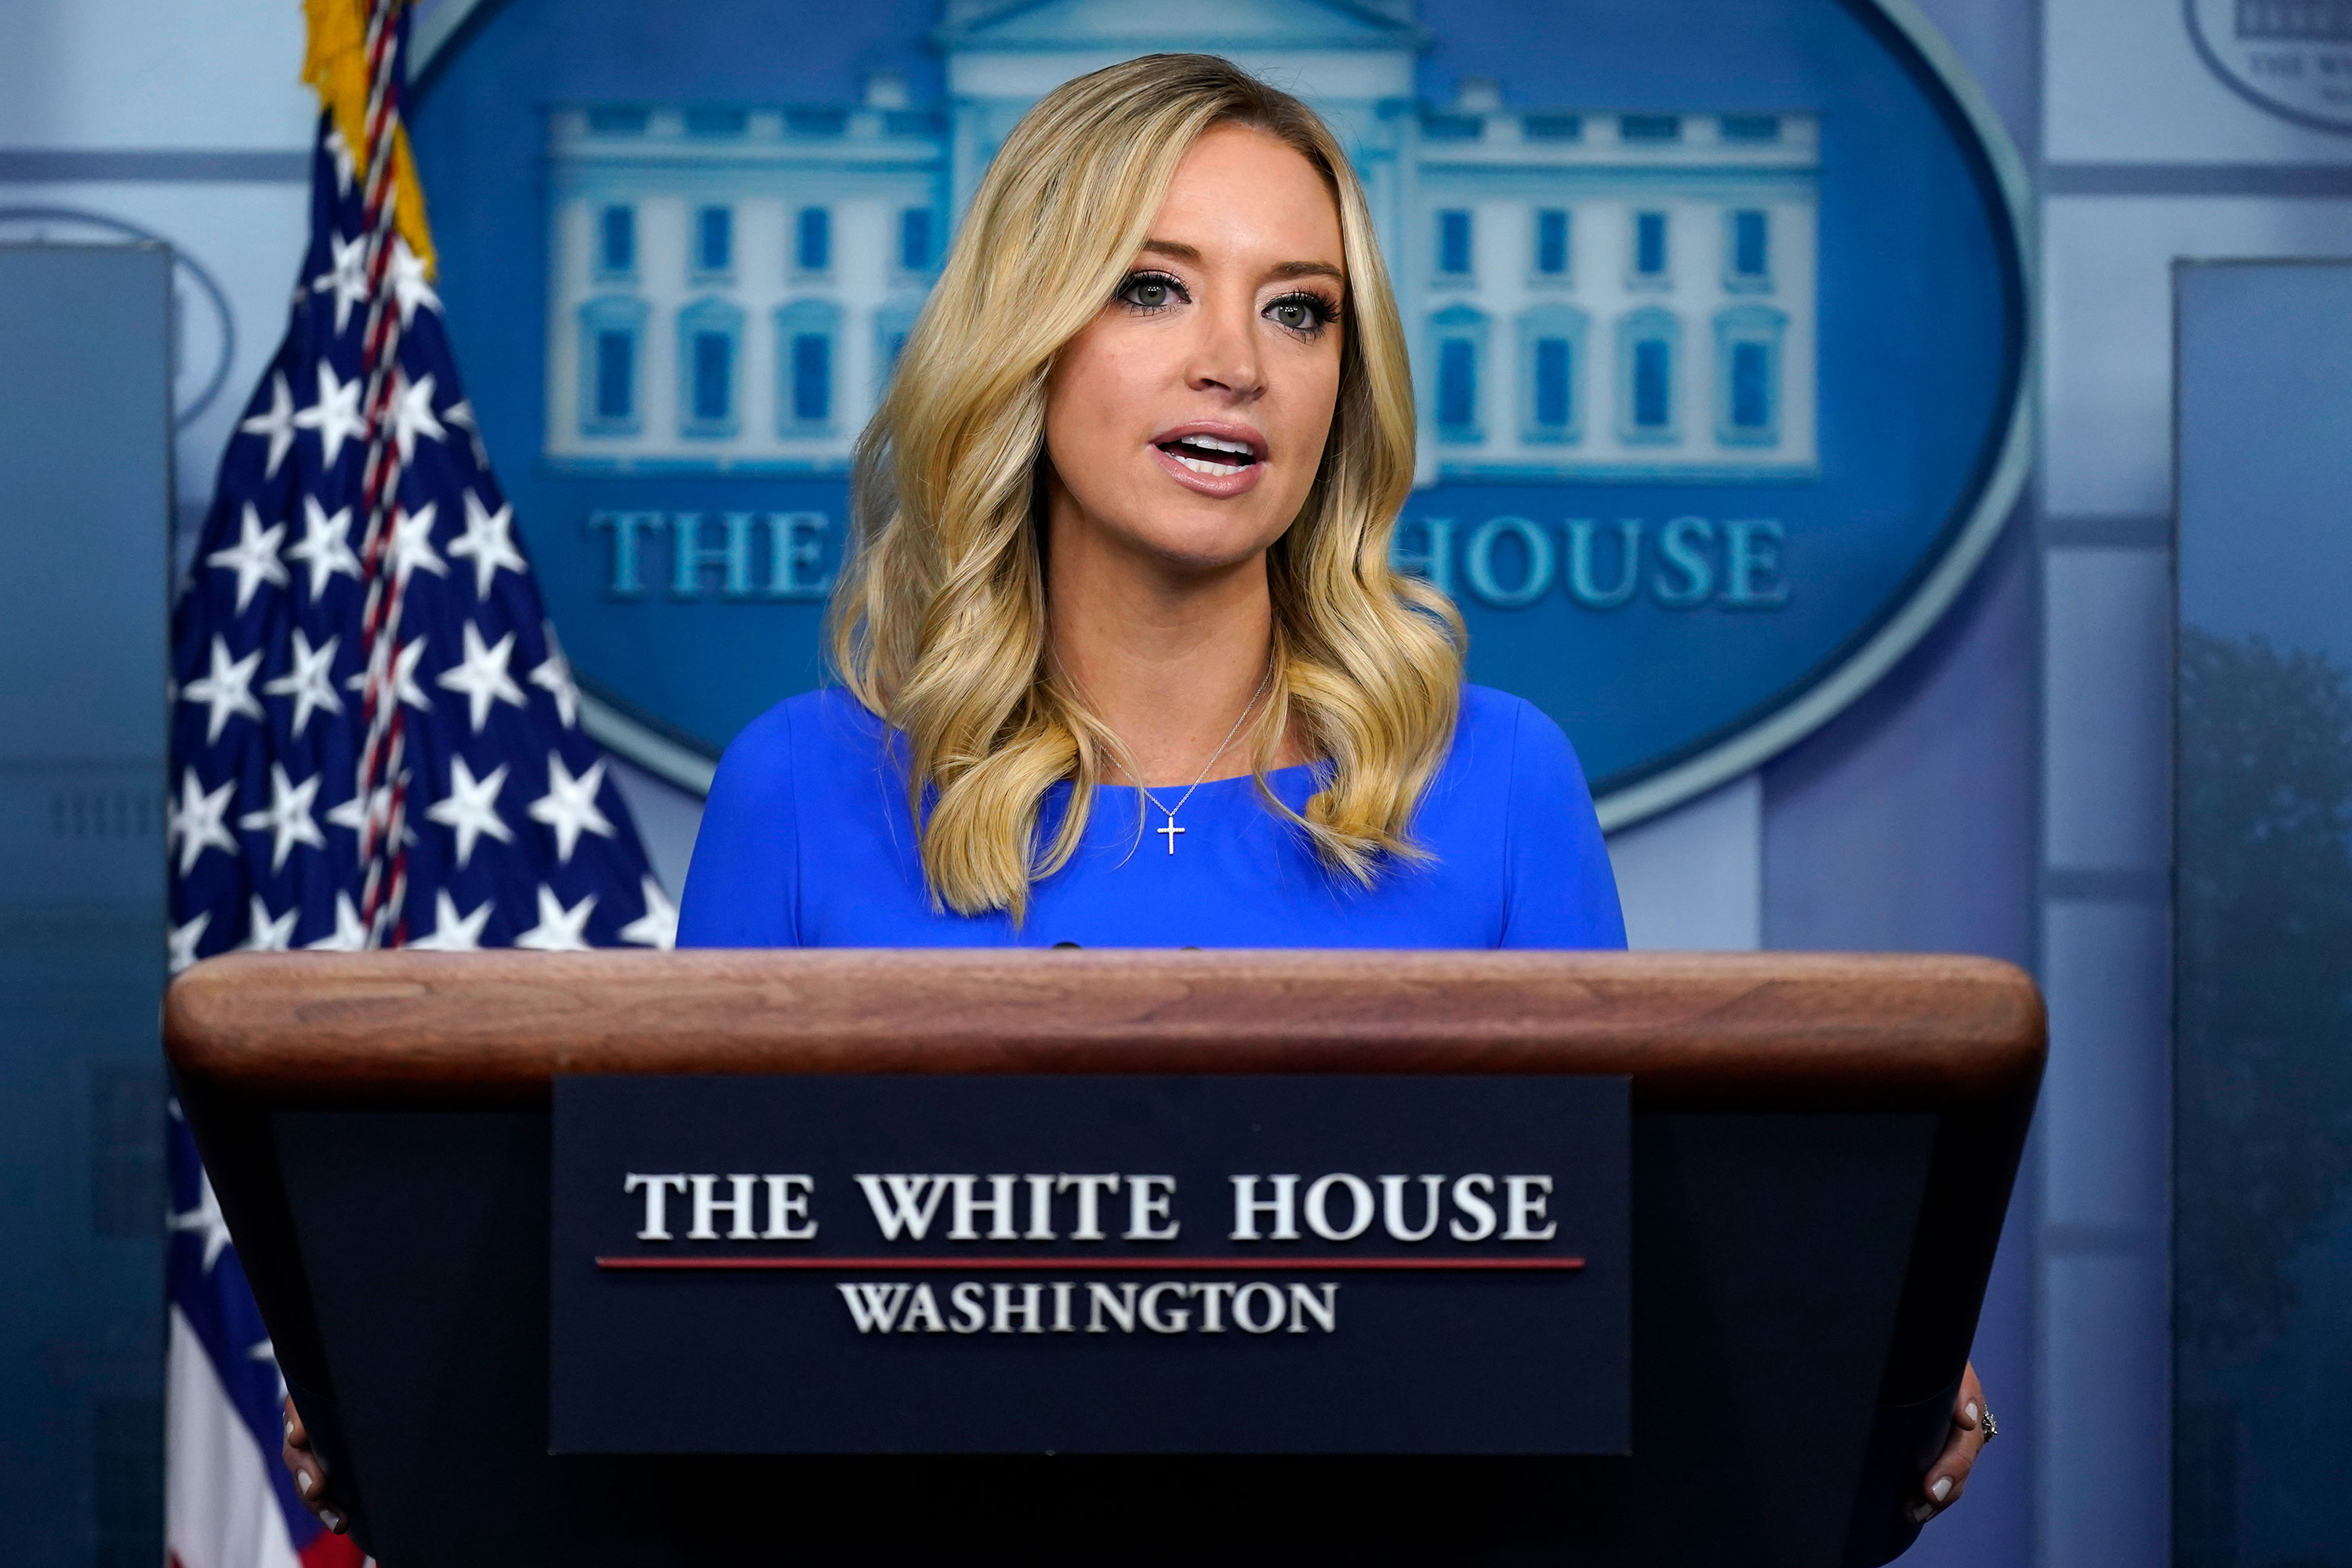 White House press secretary Kayleigh McEnany speaks during a news conference at the White House on October 1 in Washington, DC.